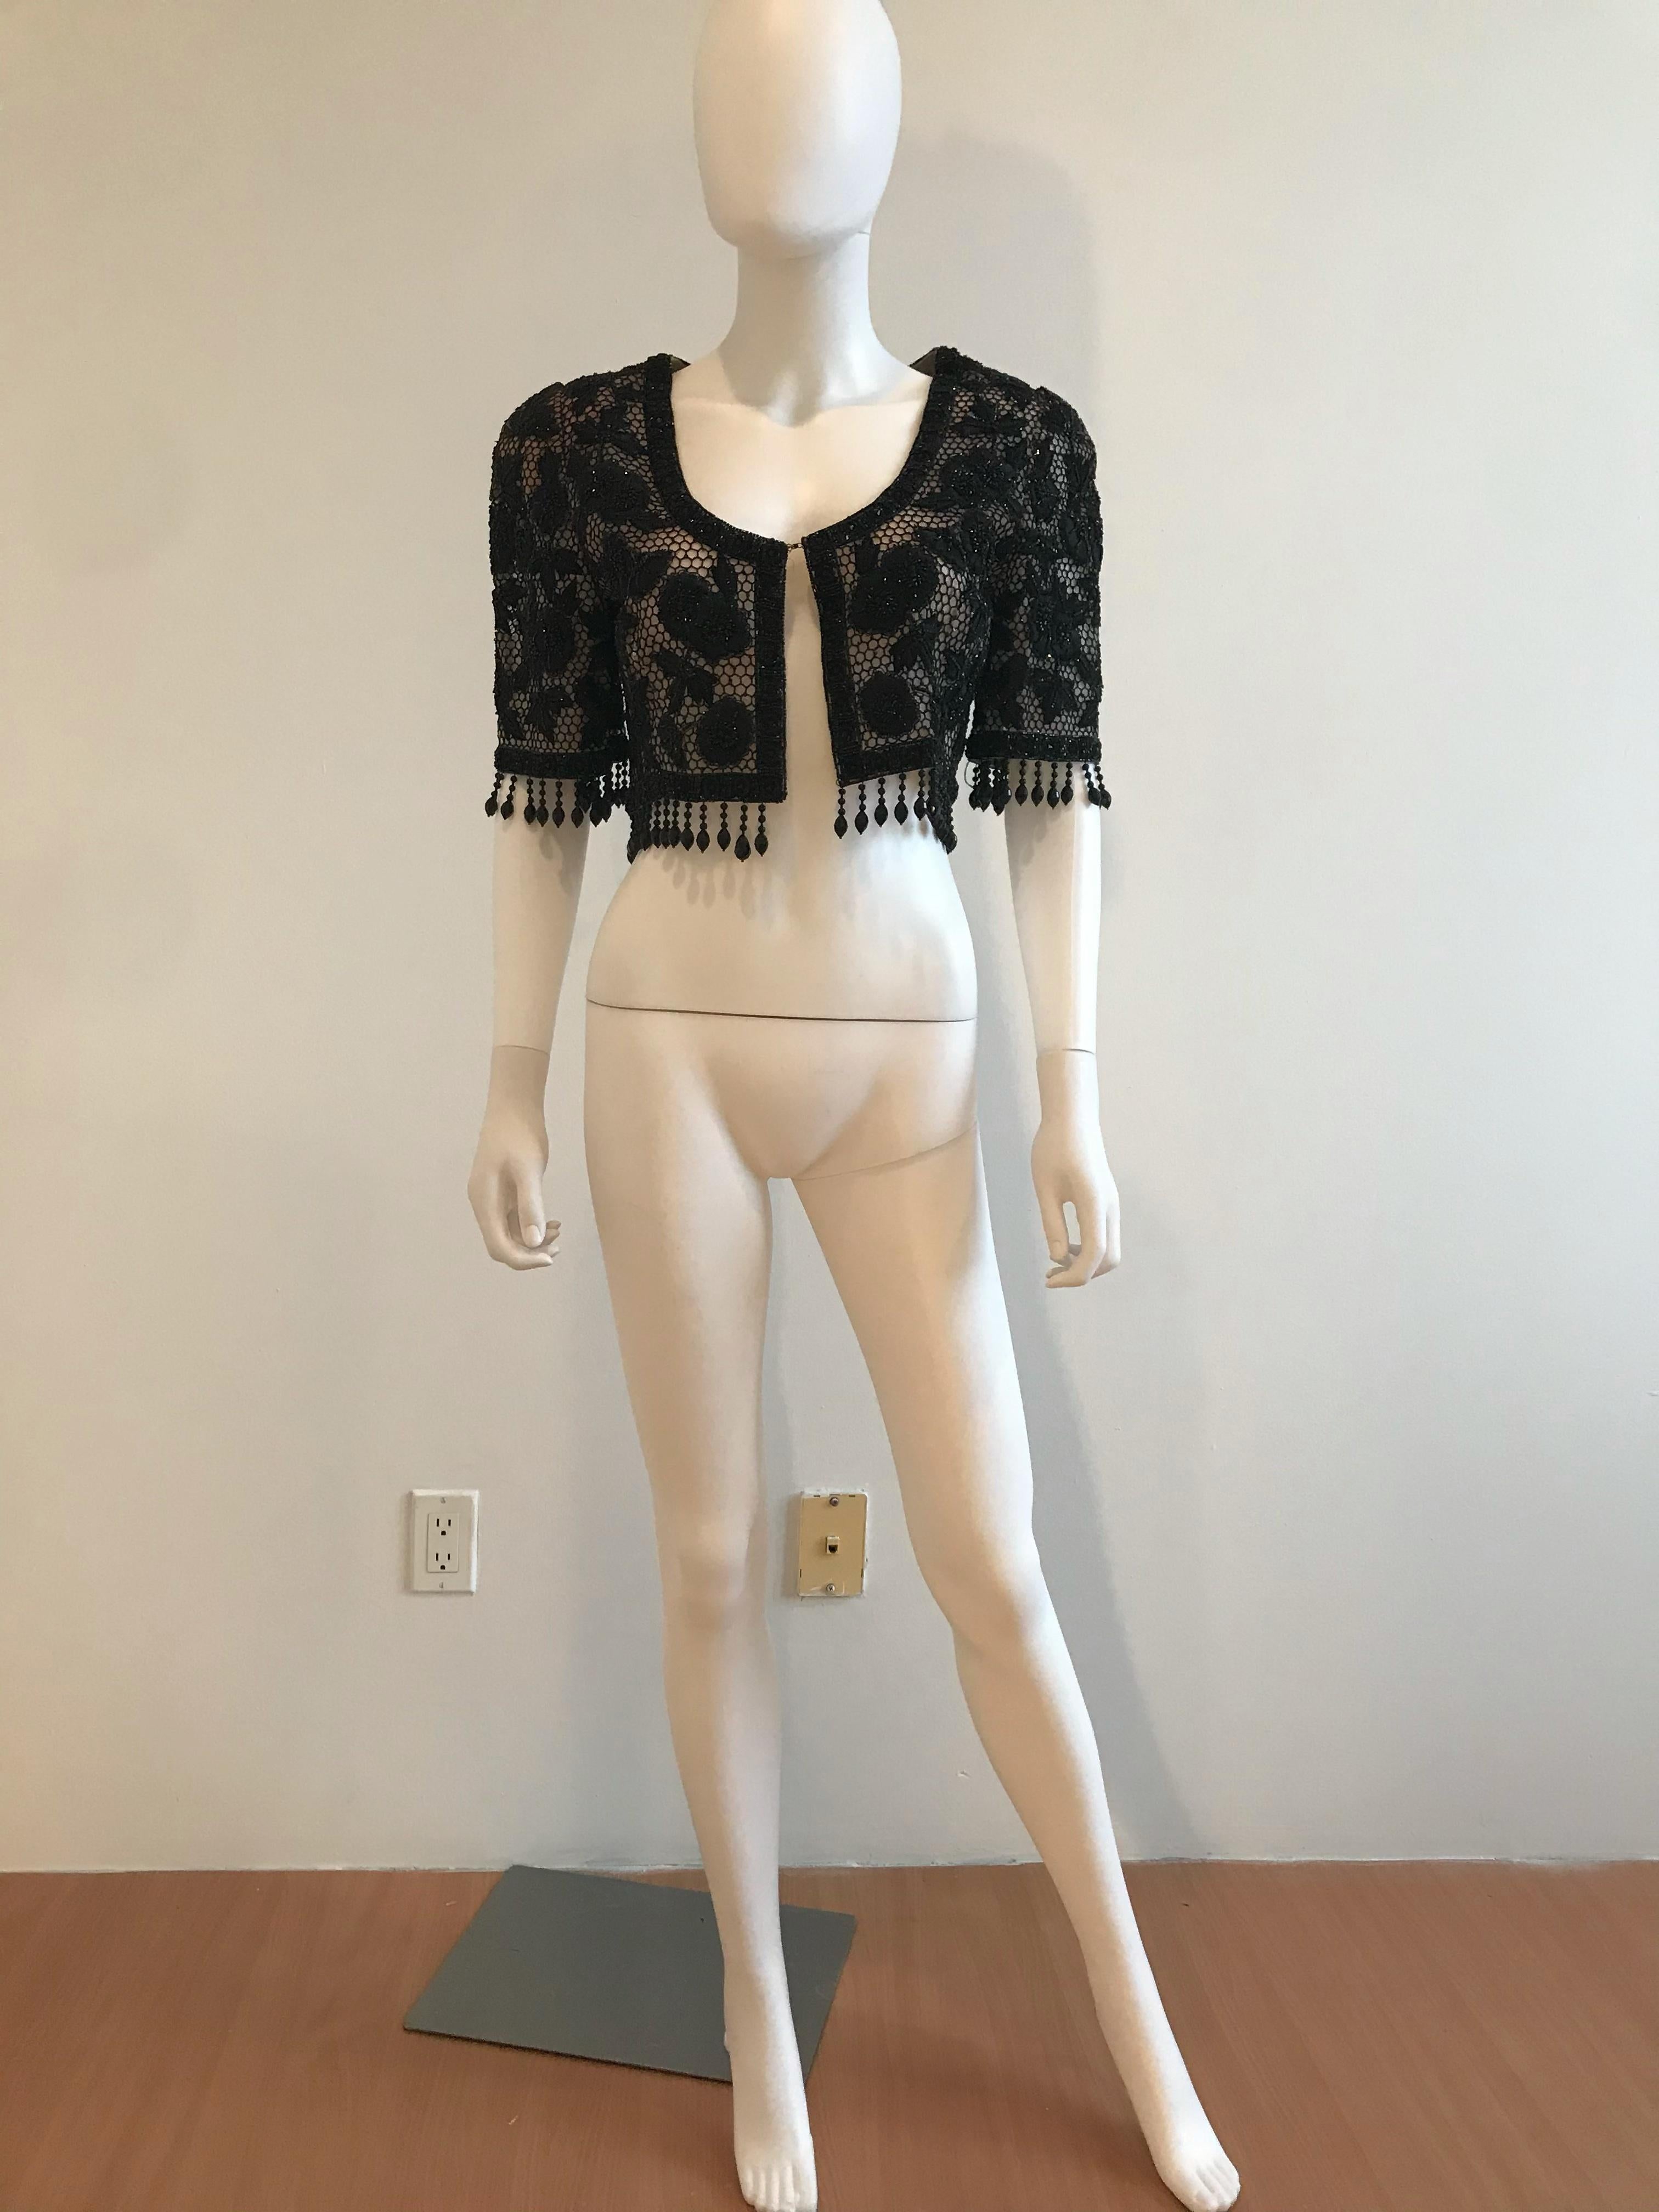 Oscar De La Renta Black Beaded and Embroidered Cropped Evening Bolero. This jacket features threaded embroidered flowers with beaded accents. It also has beaded fringe detailing around the bottom hem and sleeves. The sleeves are quarter sleeves and